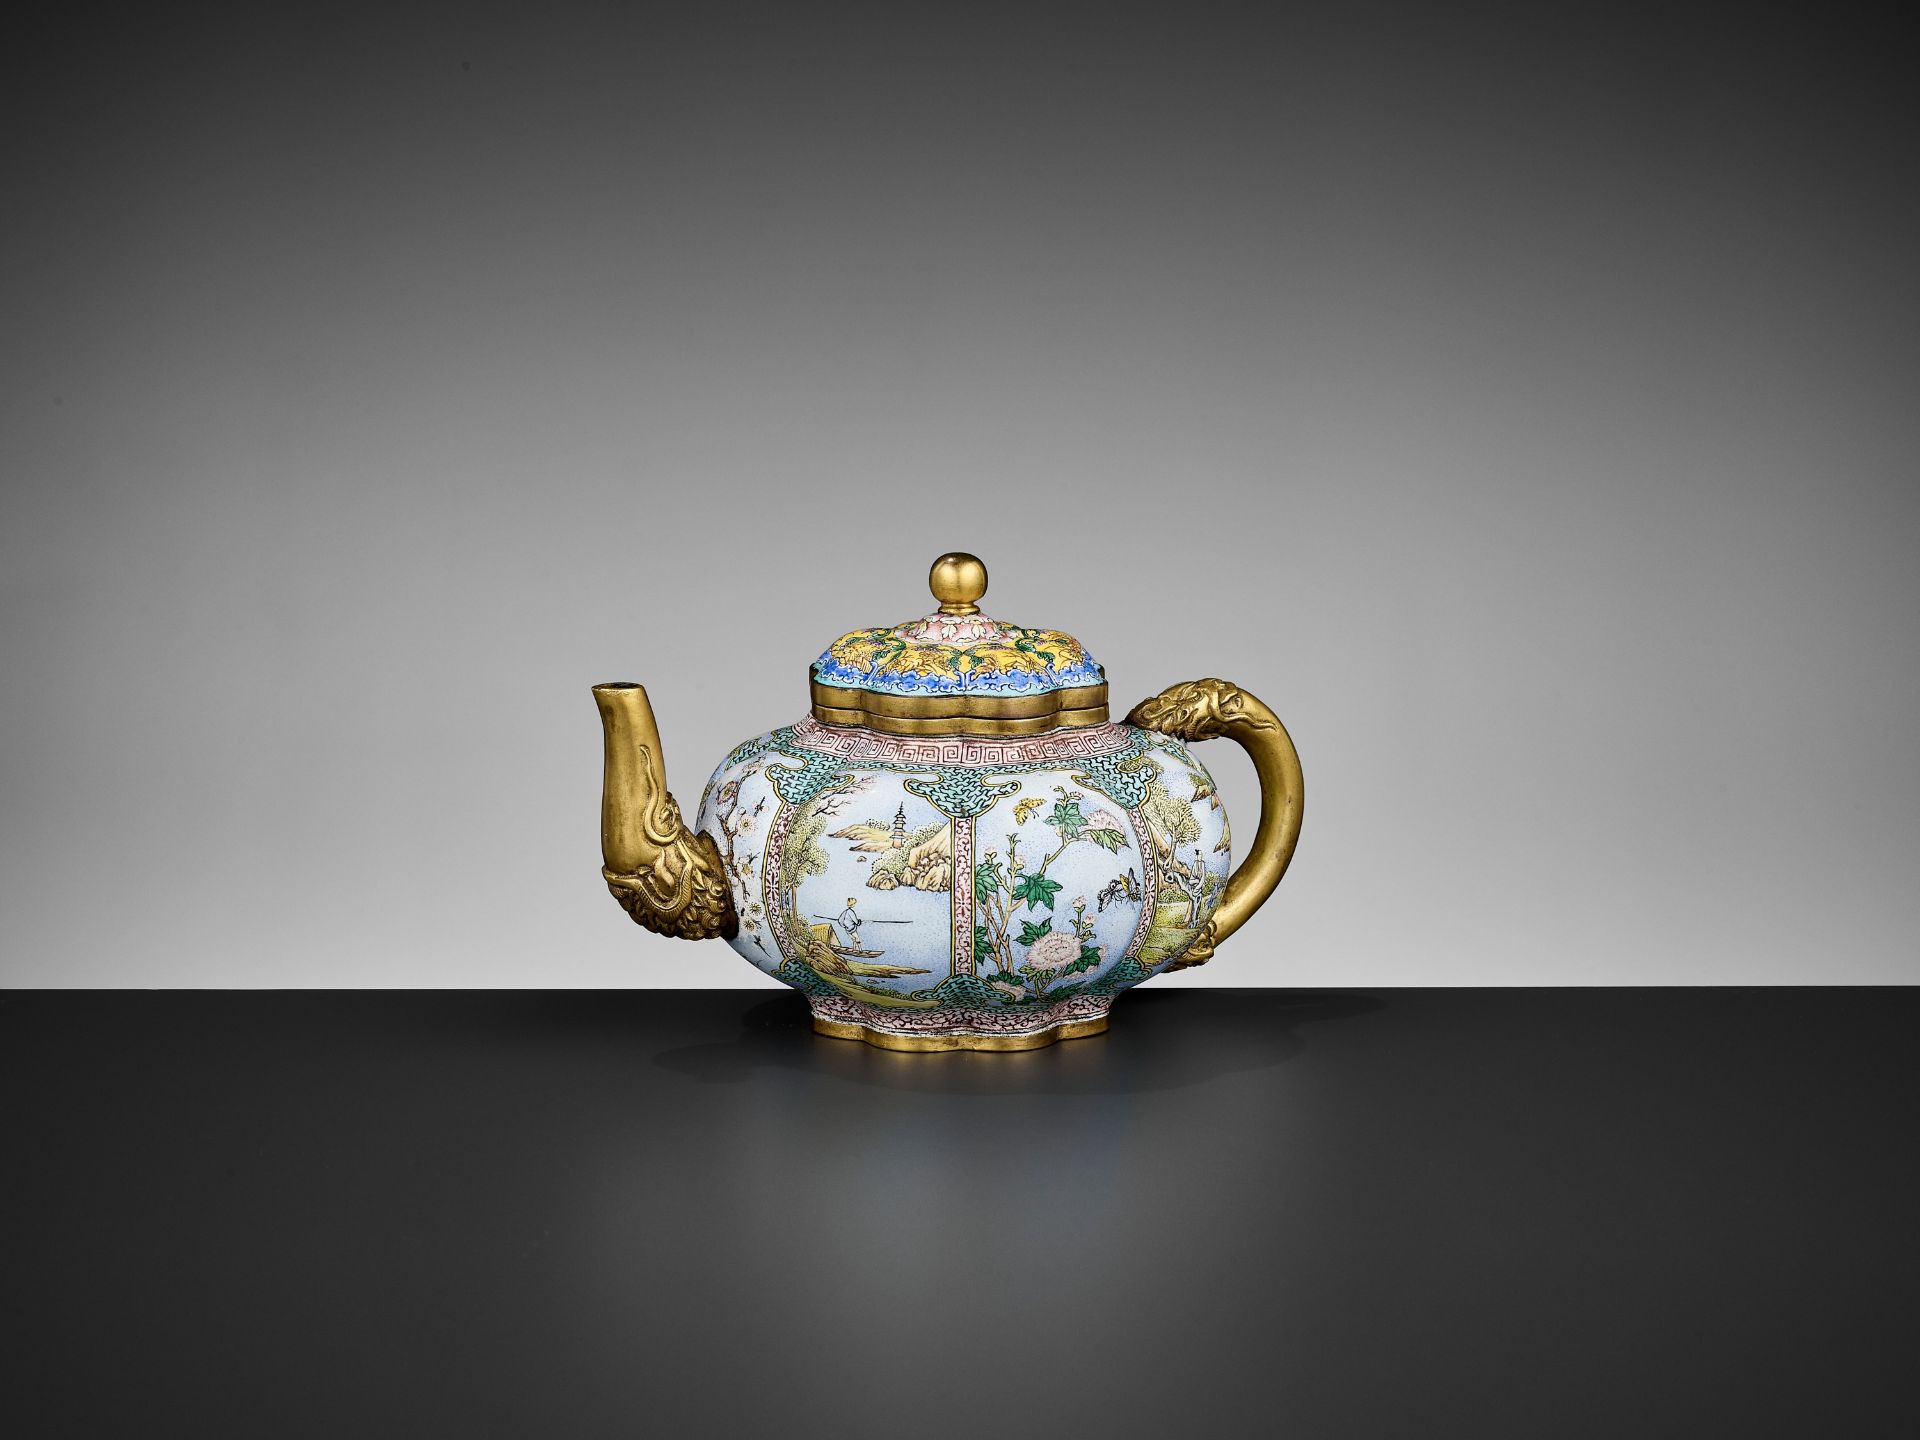 A LOBED ENAMEL ON COPPER TEAPOT, QING DYNASTY - Image 9 of 20